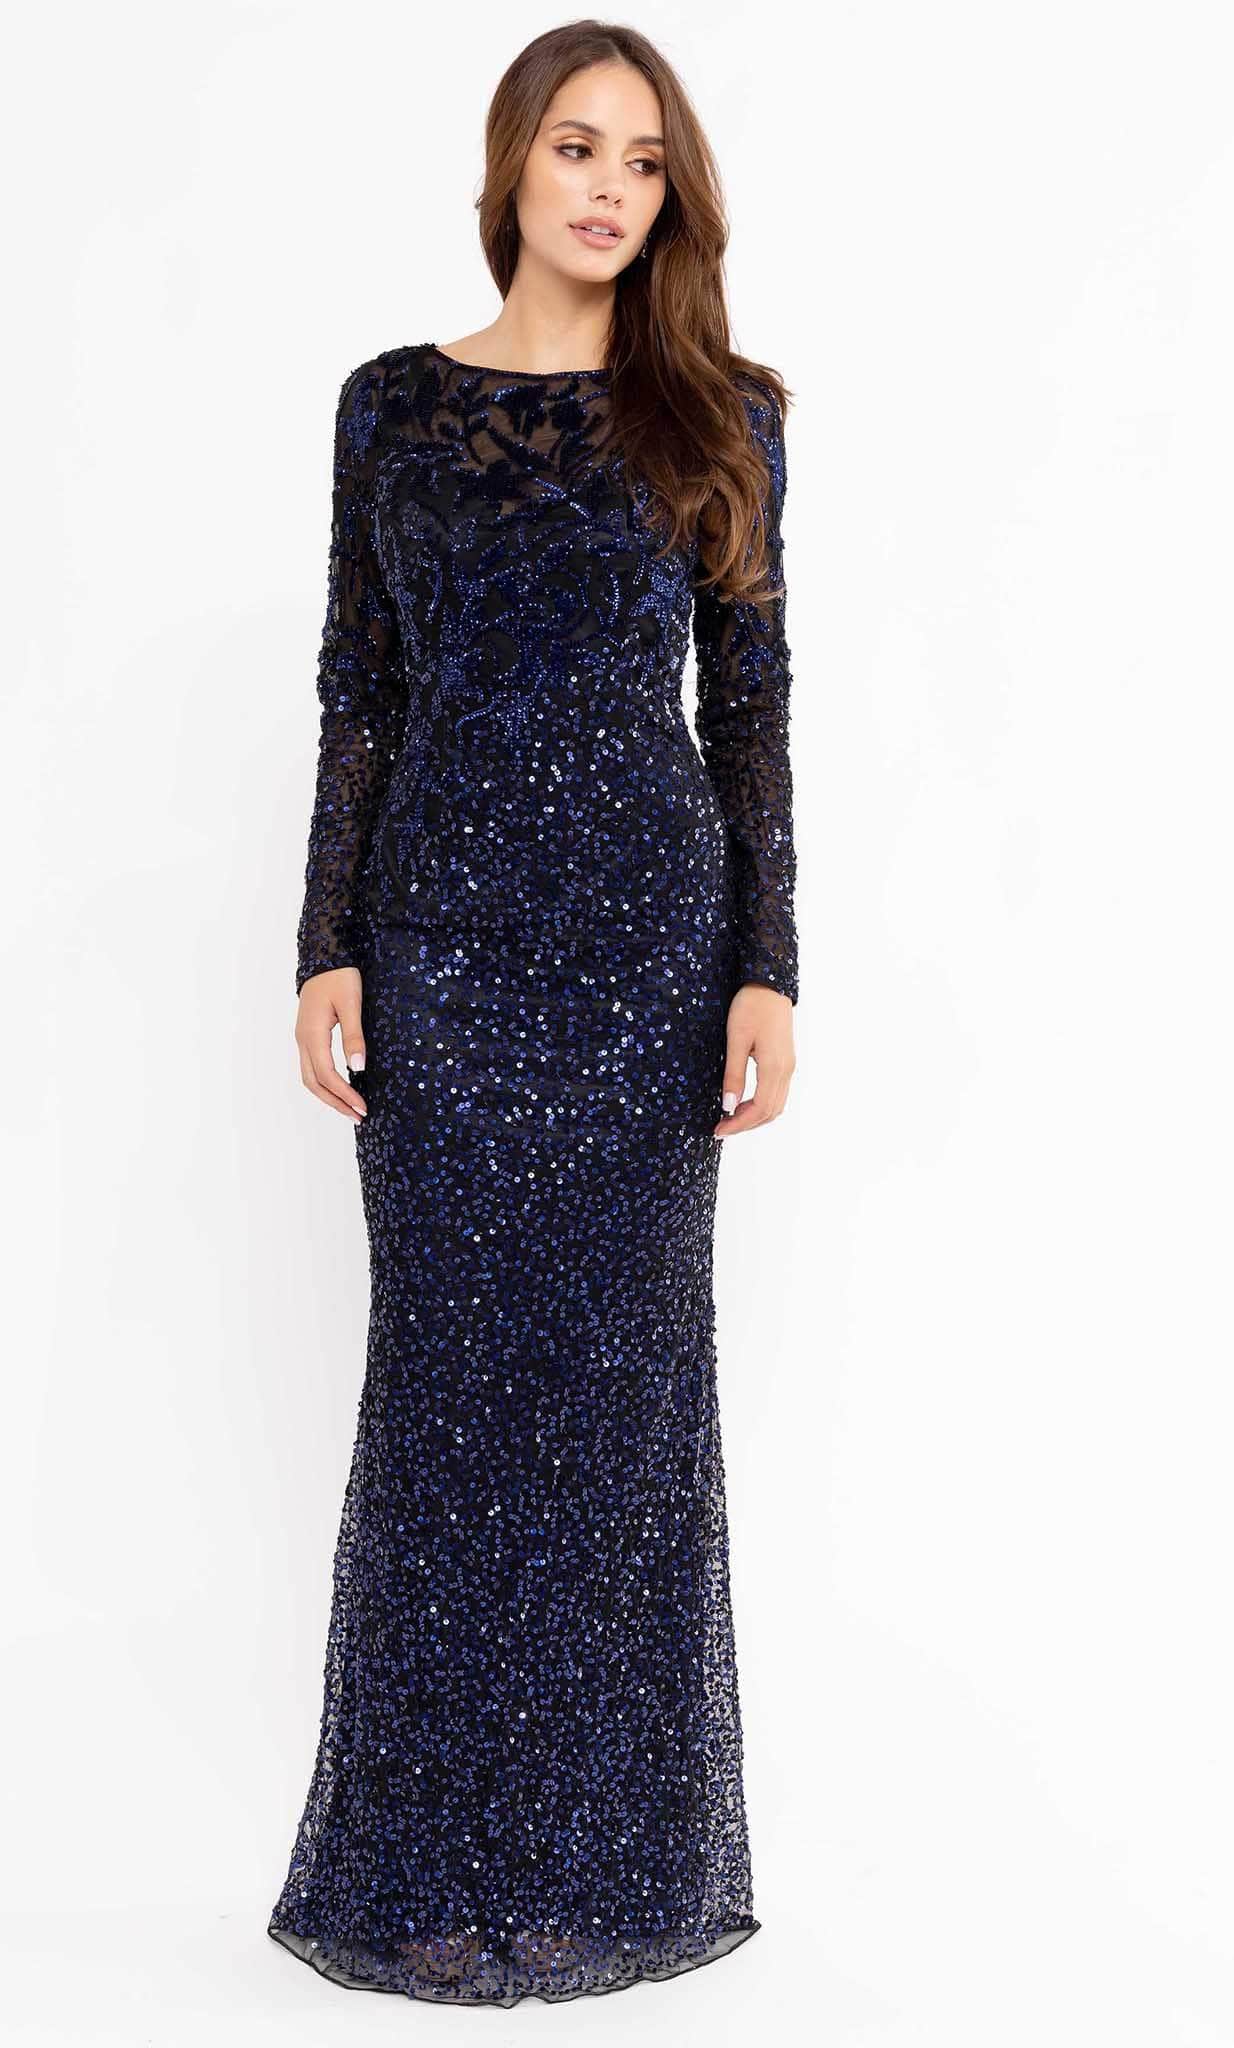 Image of Primavera Couture 13105 - Long Sleeve Evening Gown